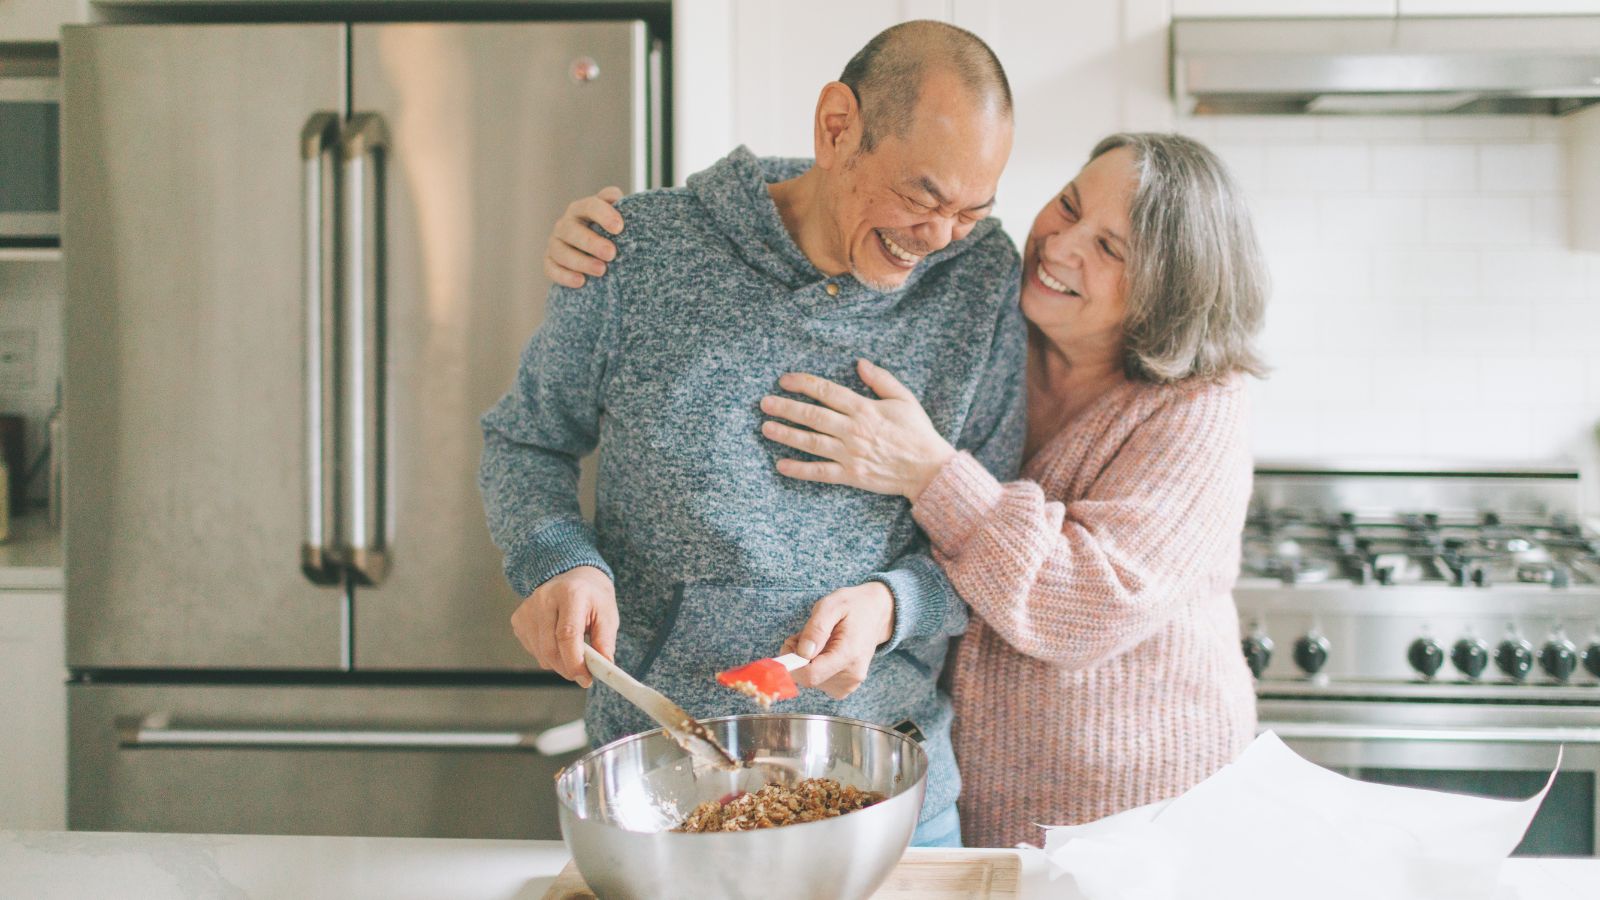 A couple are making diabetes-friendly recipes in the kitchen